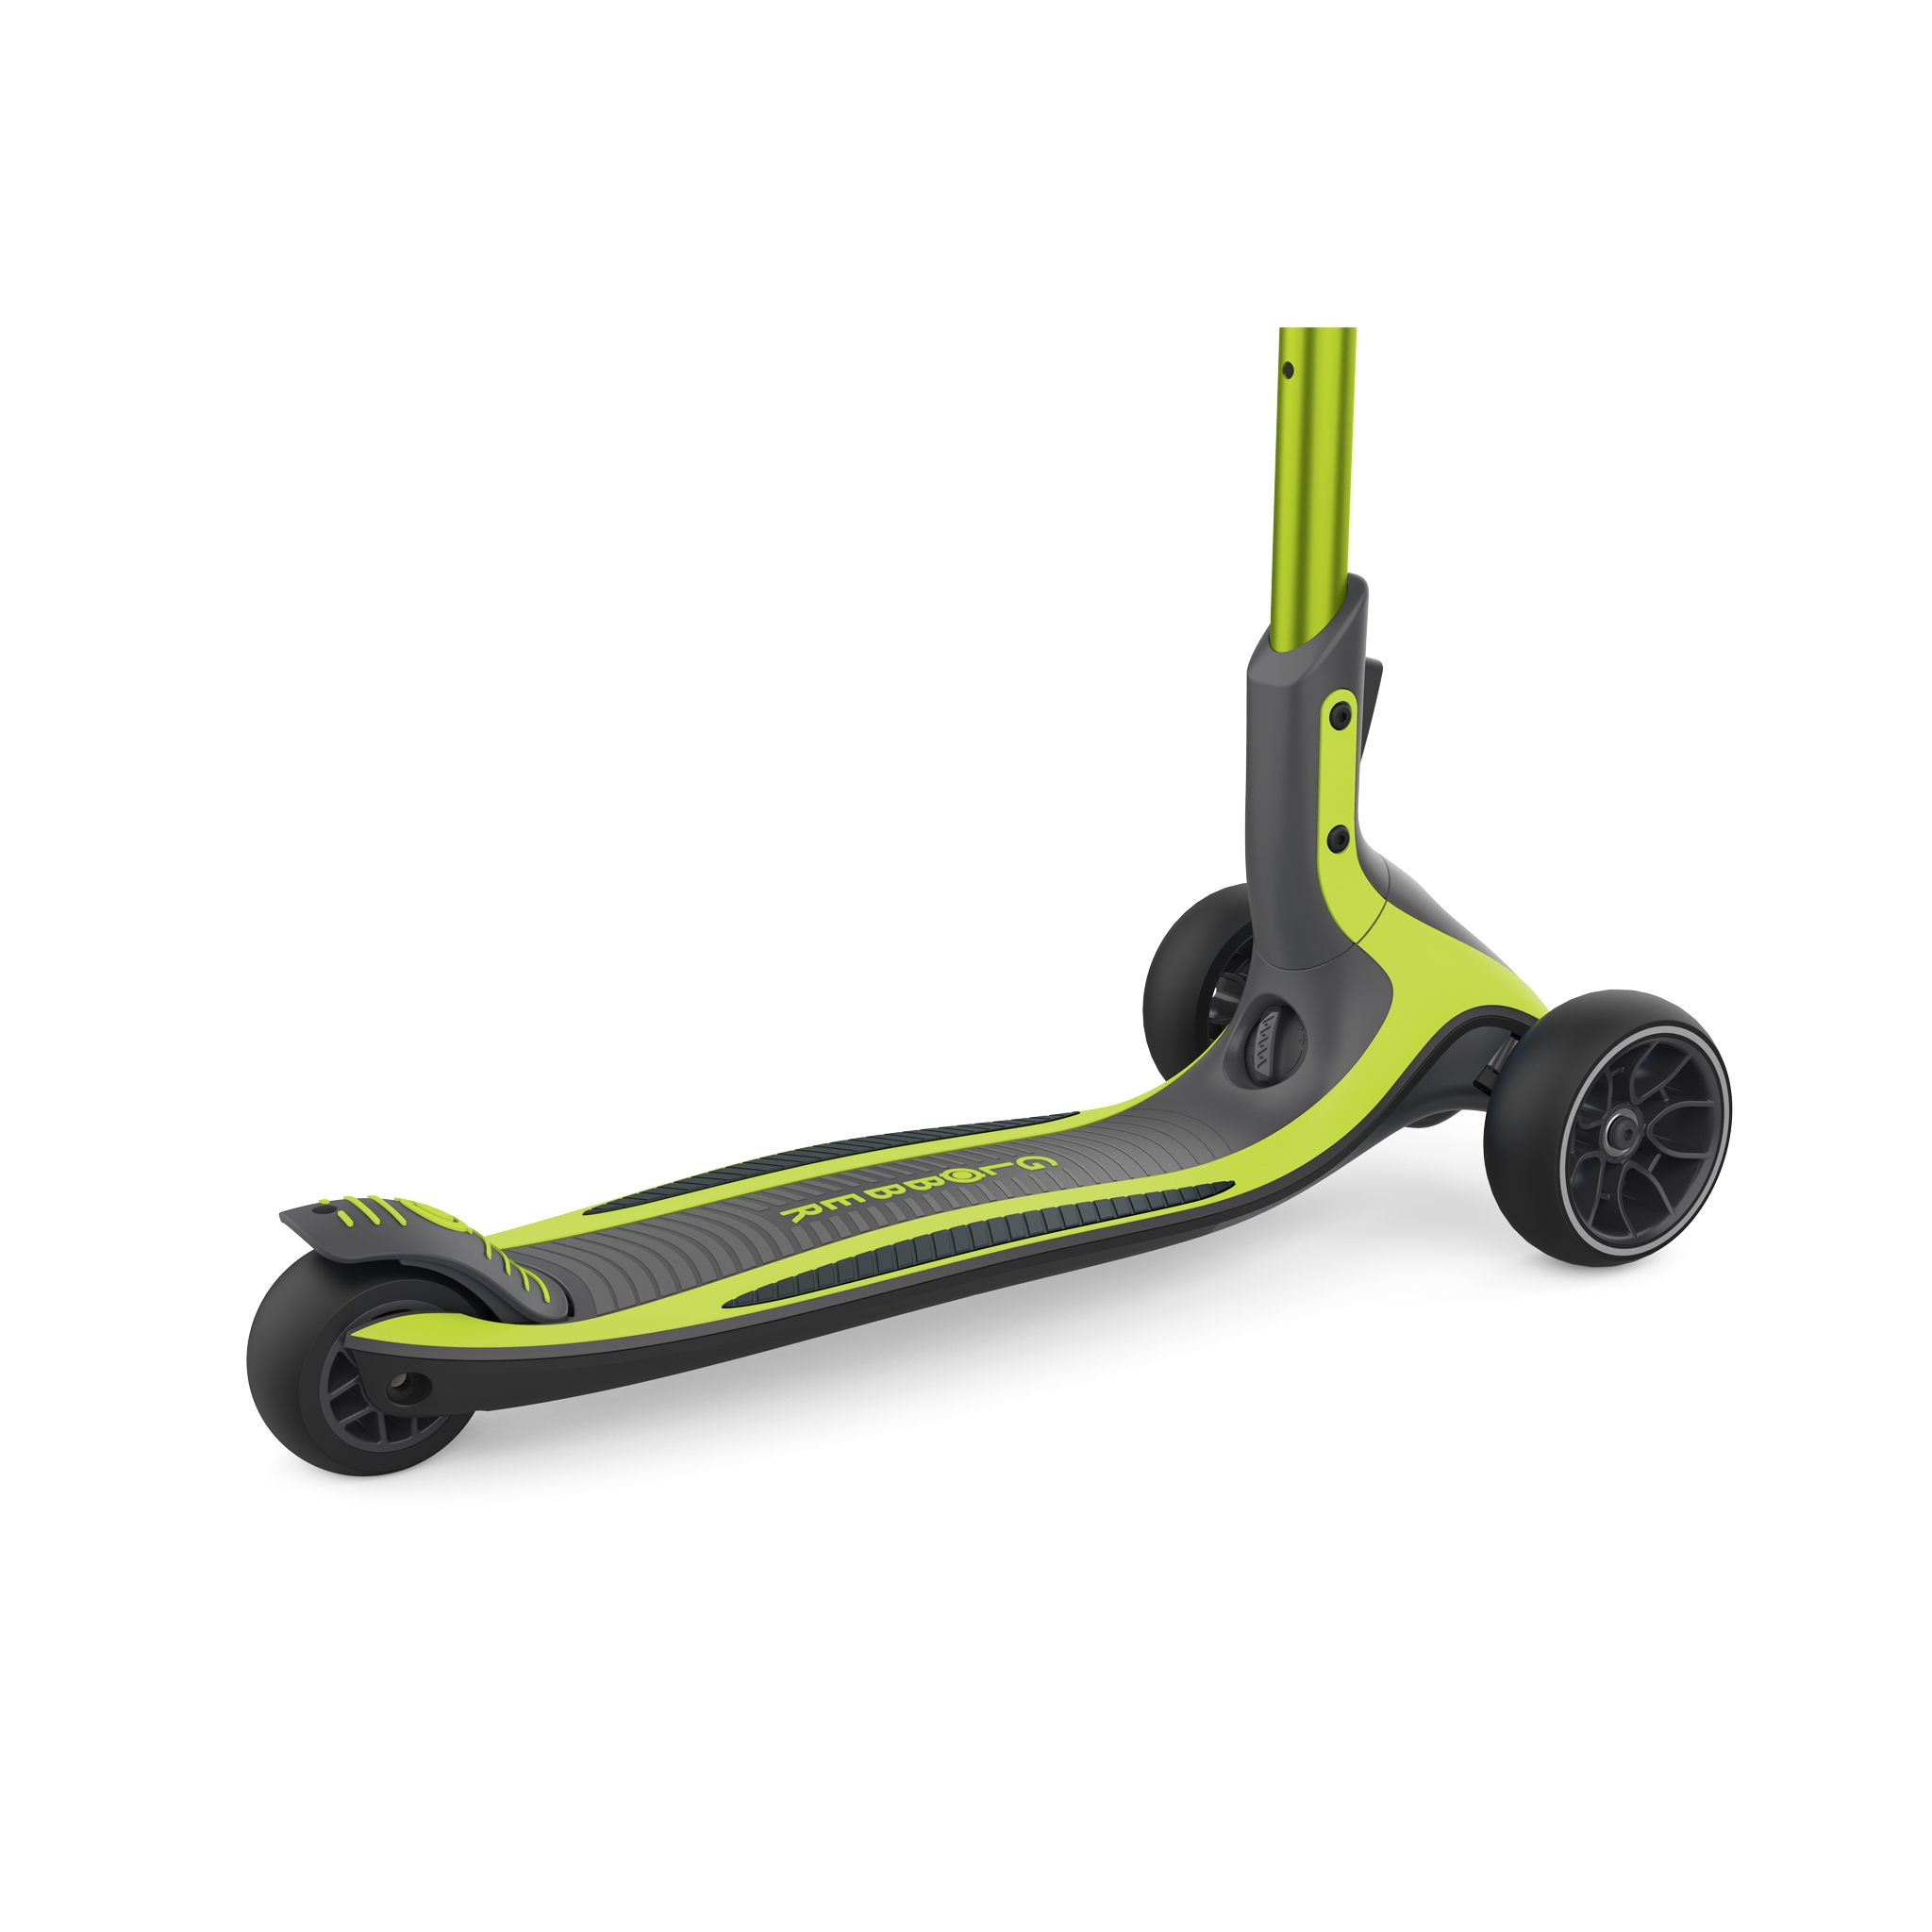 3 wheel foldable scooter for kids, teens and adults - Globber ULTIMUM 6